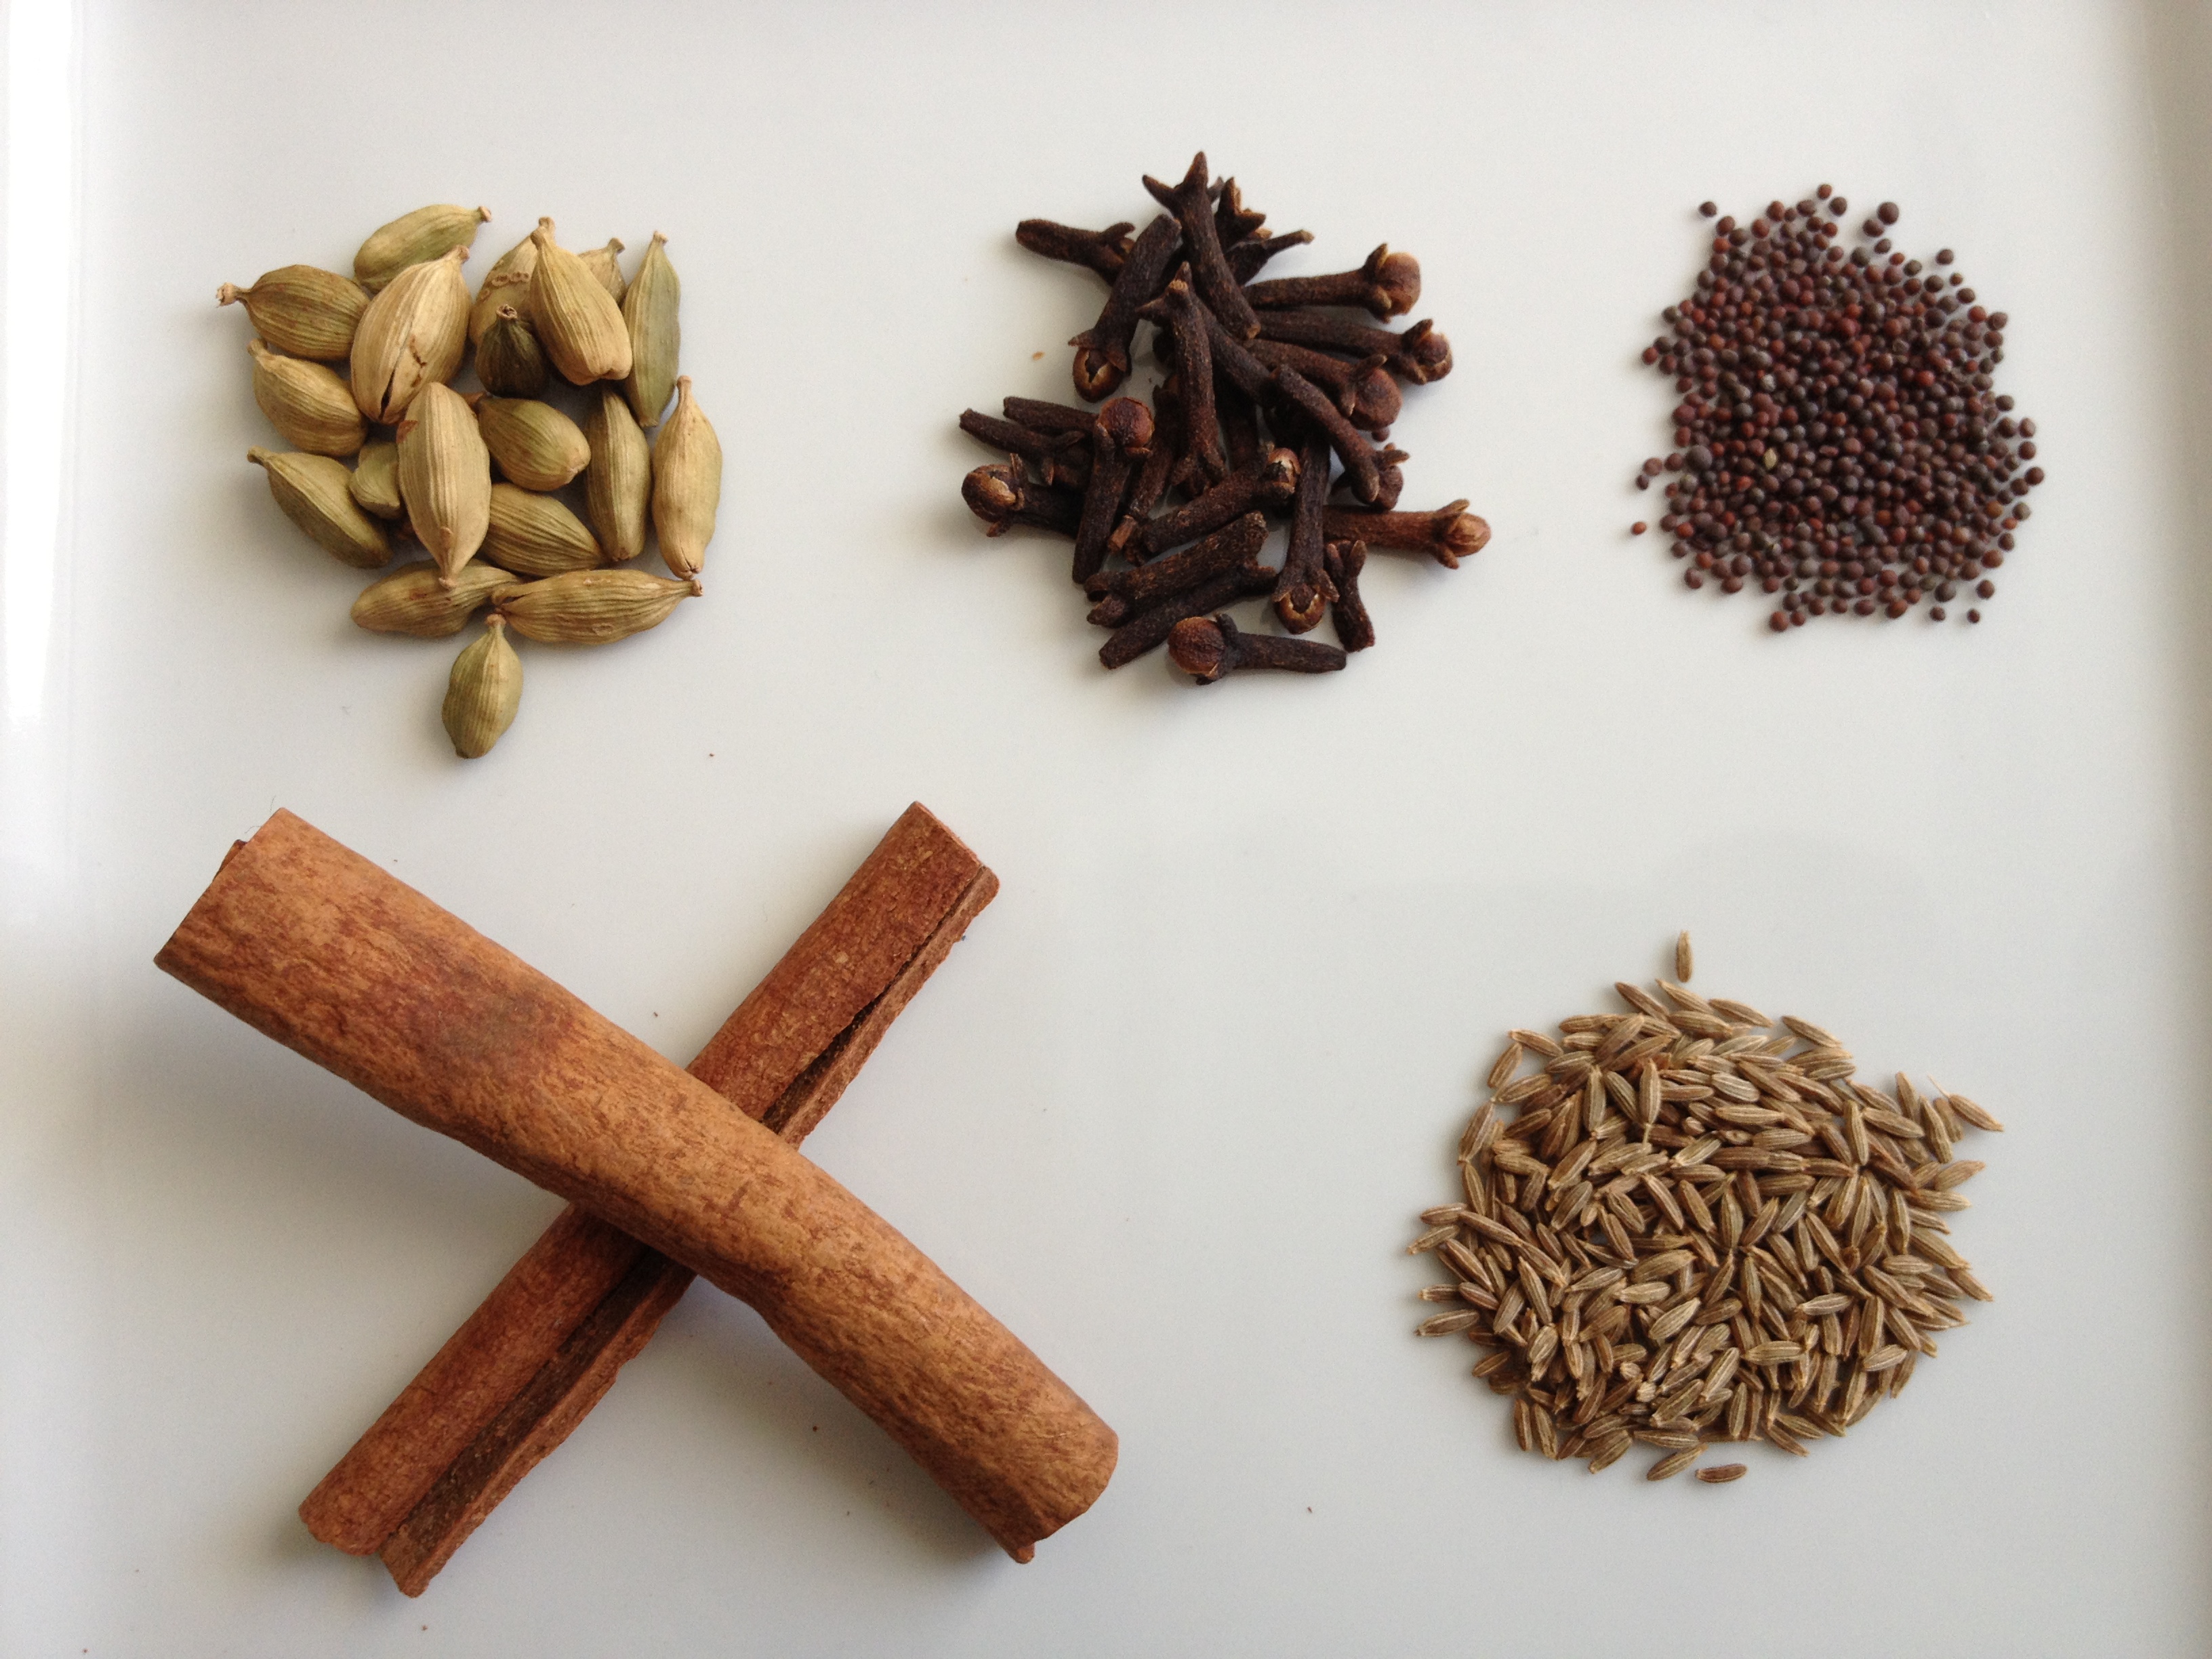 Key Whole Spices in Indian Cooking